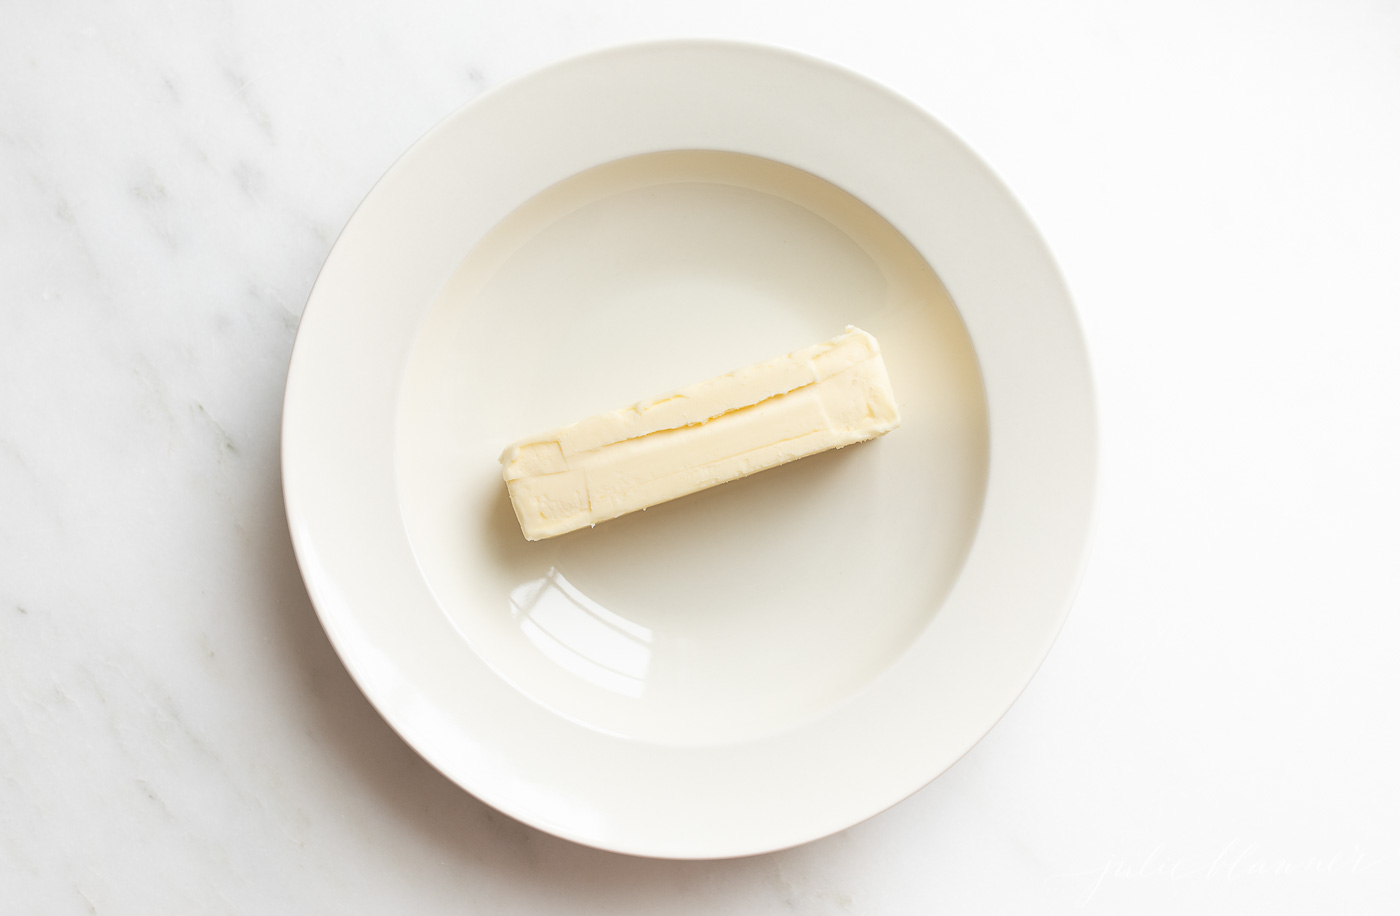 A white plate on a white surface, stick of butter in the center.